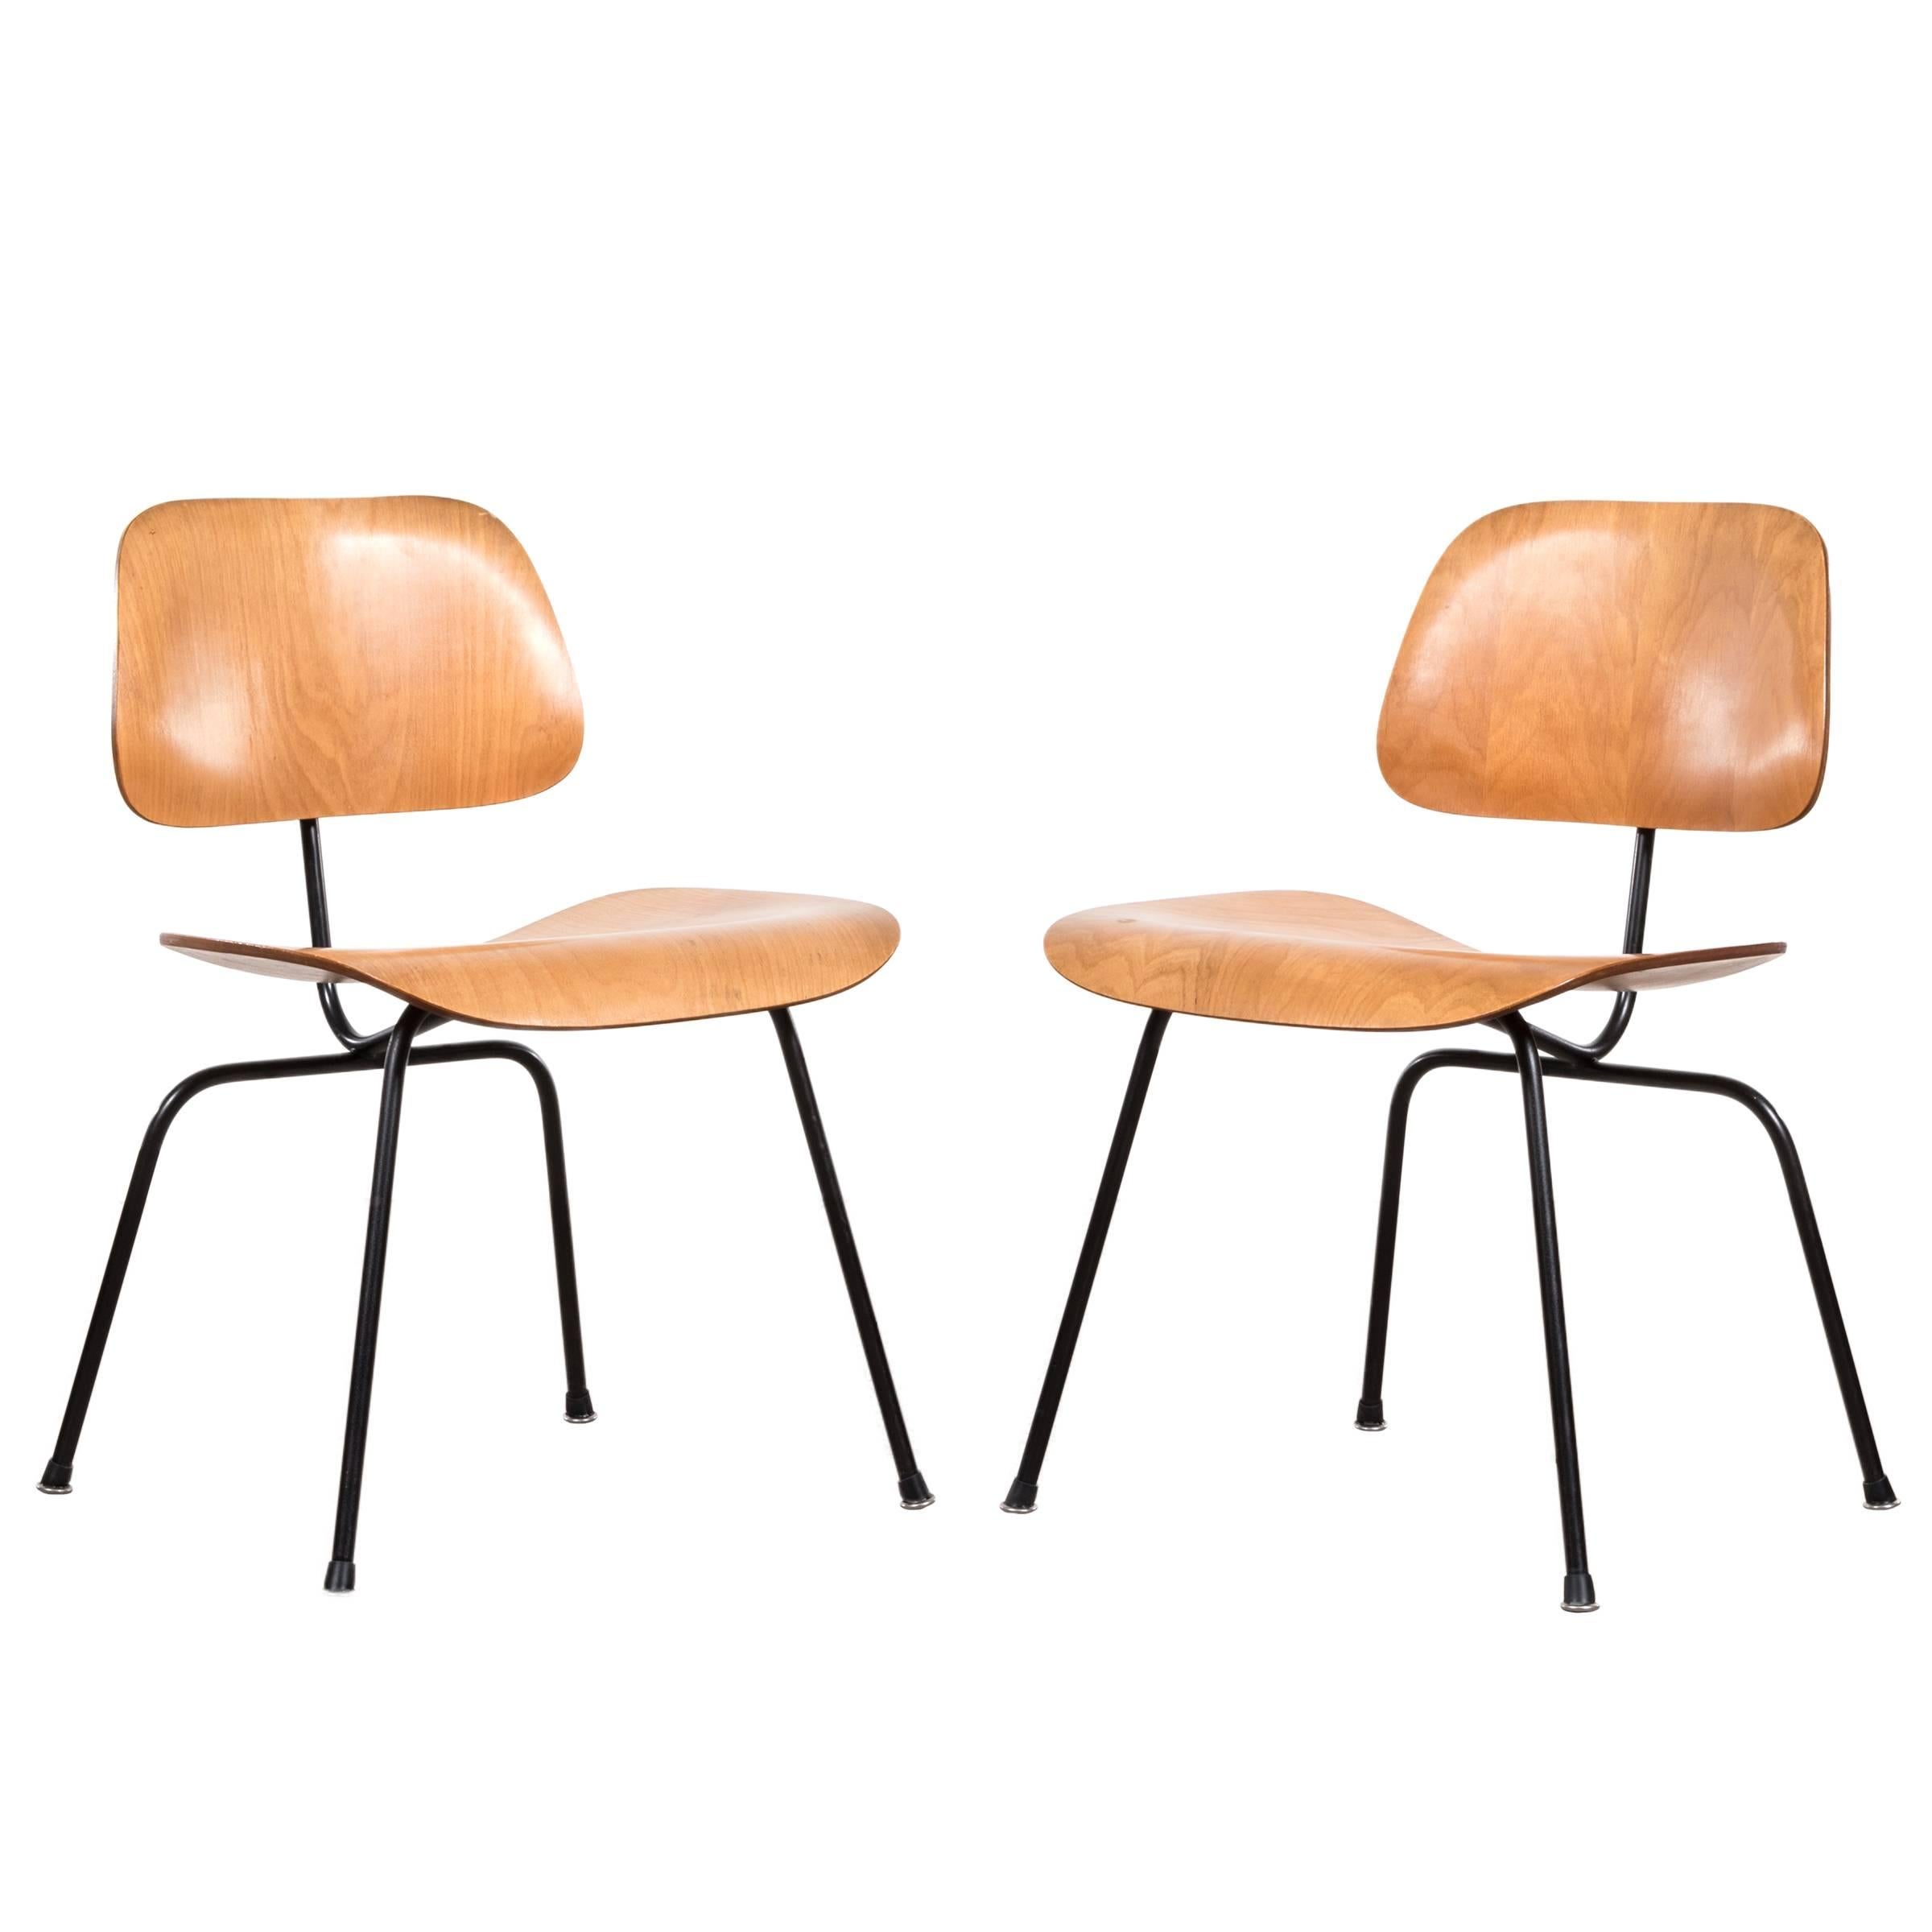 Eames DCM Pair of Ash Side Chair by Herman Miller, USA